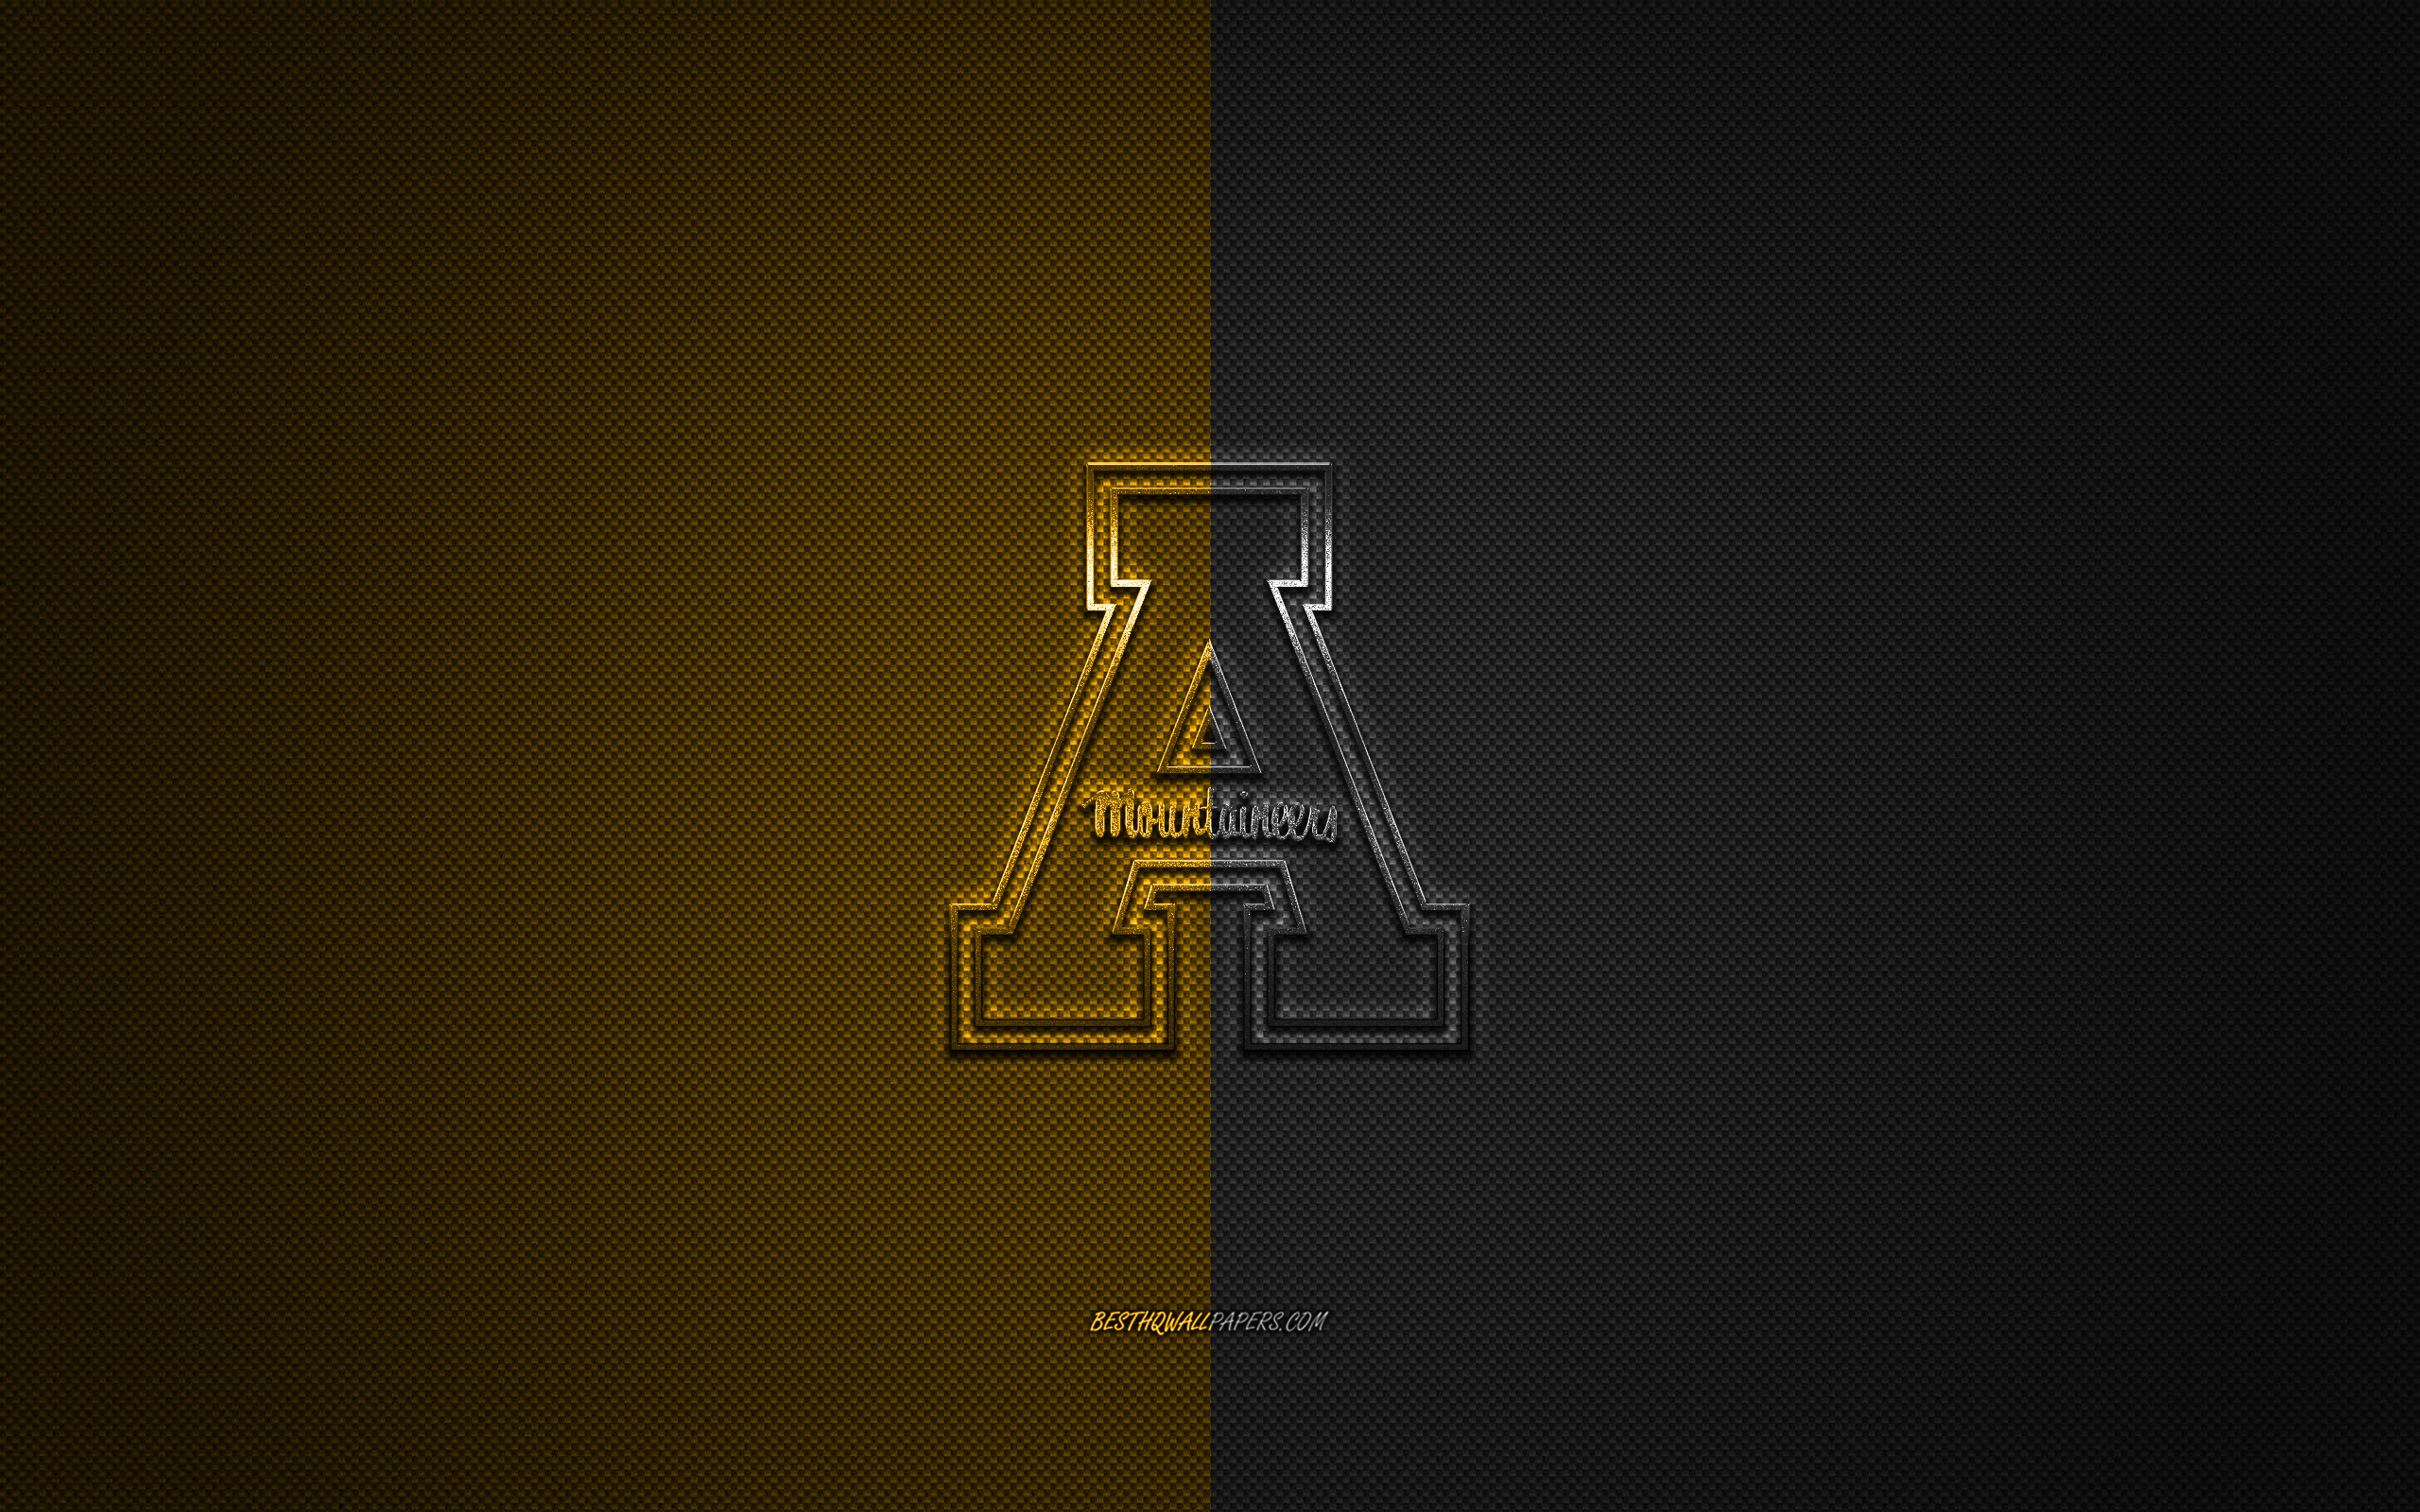 Download wallpapers appalachian state mountaineers logo american football club ncaa black and yellow logo black and yellow carbon fiber background american football boone north carolina usa appalachian state mountaineers for desktop with